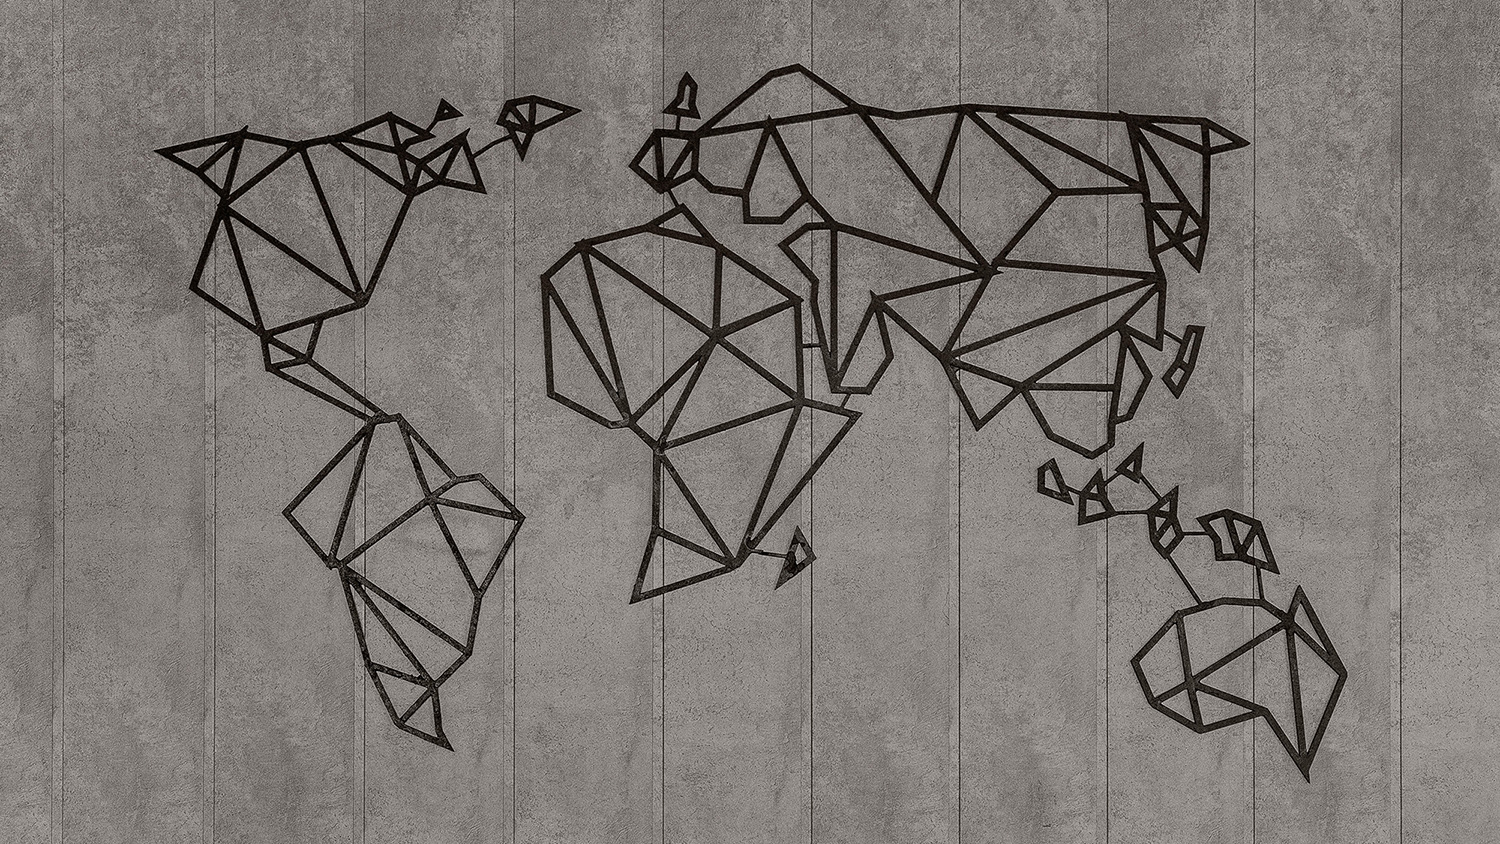 A geometric map of the world hanging on a concrete wall